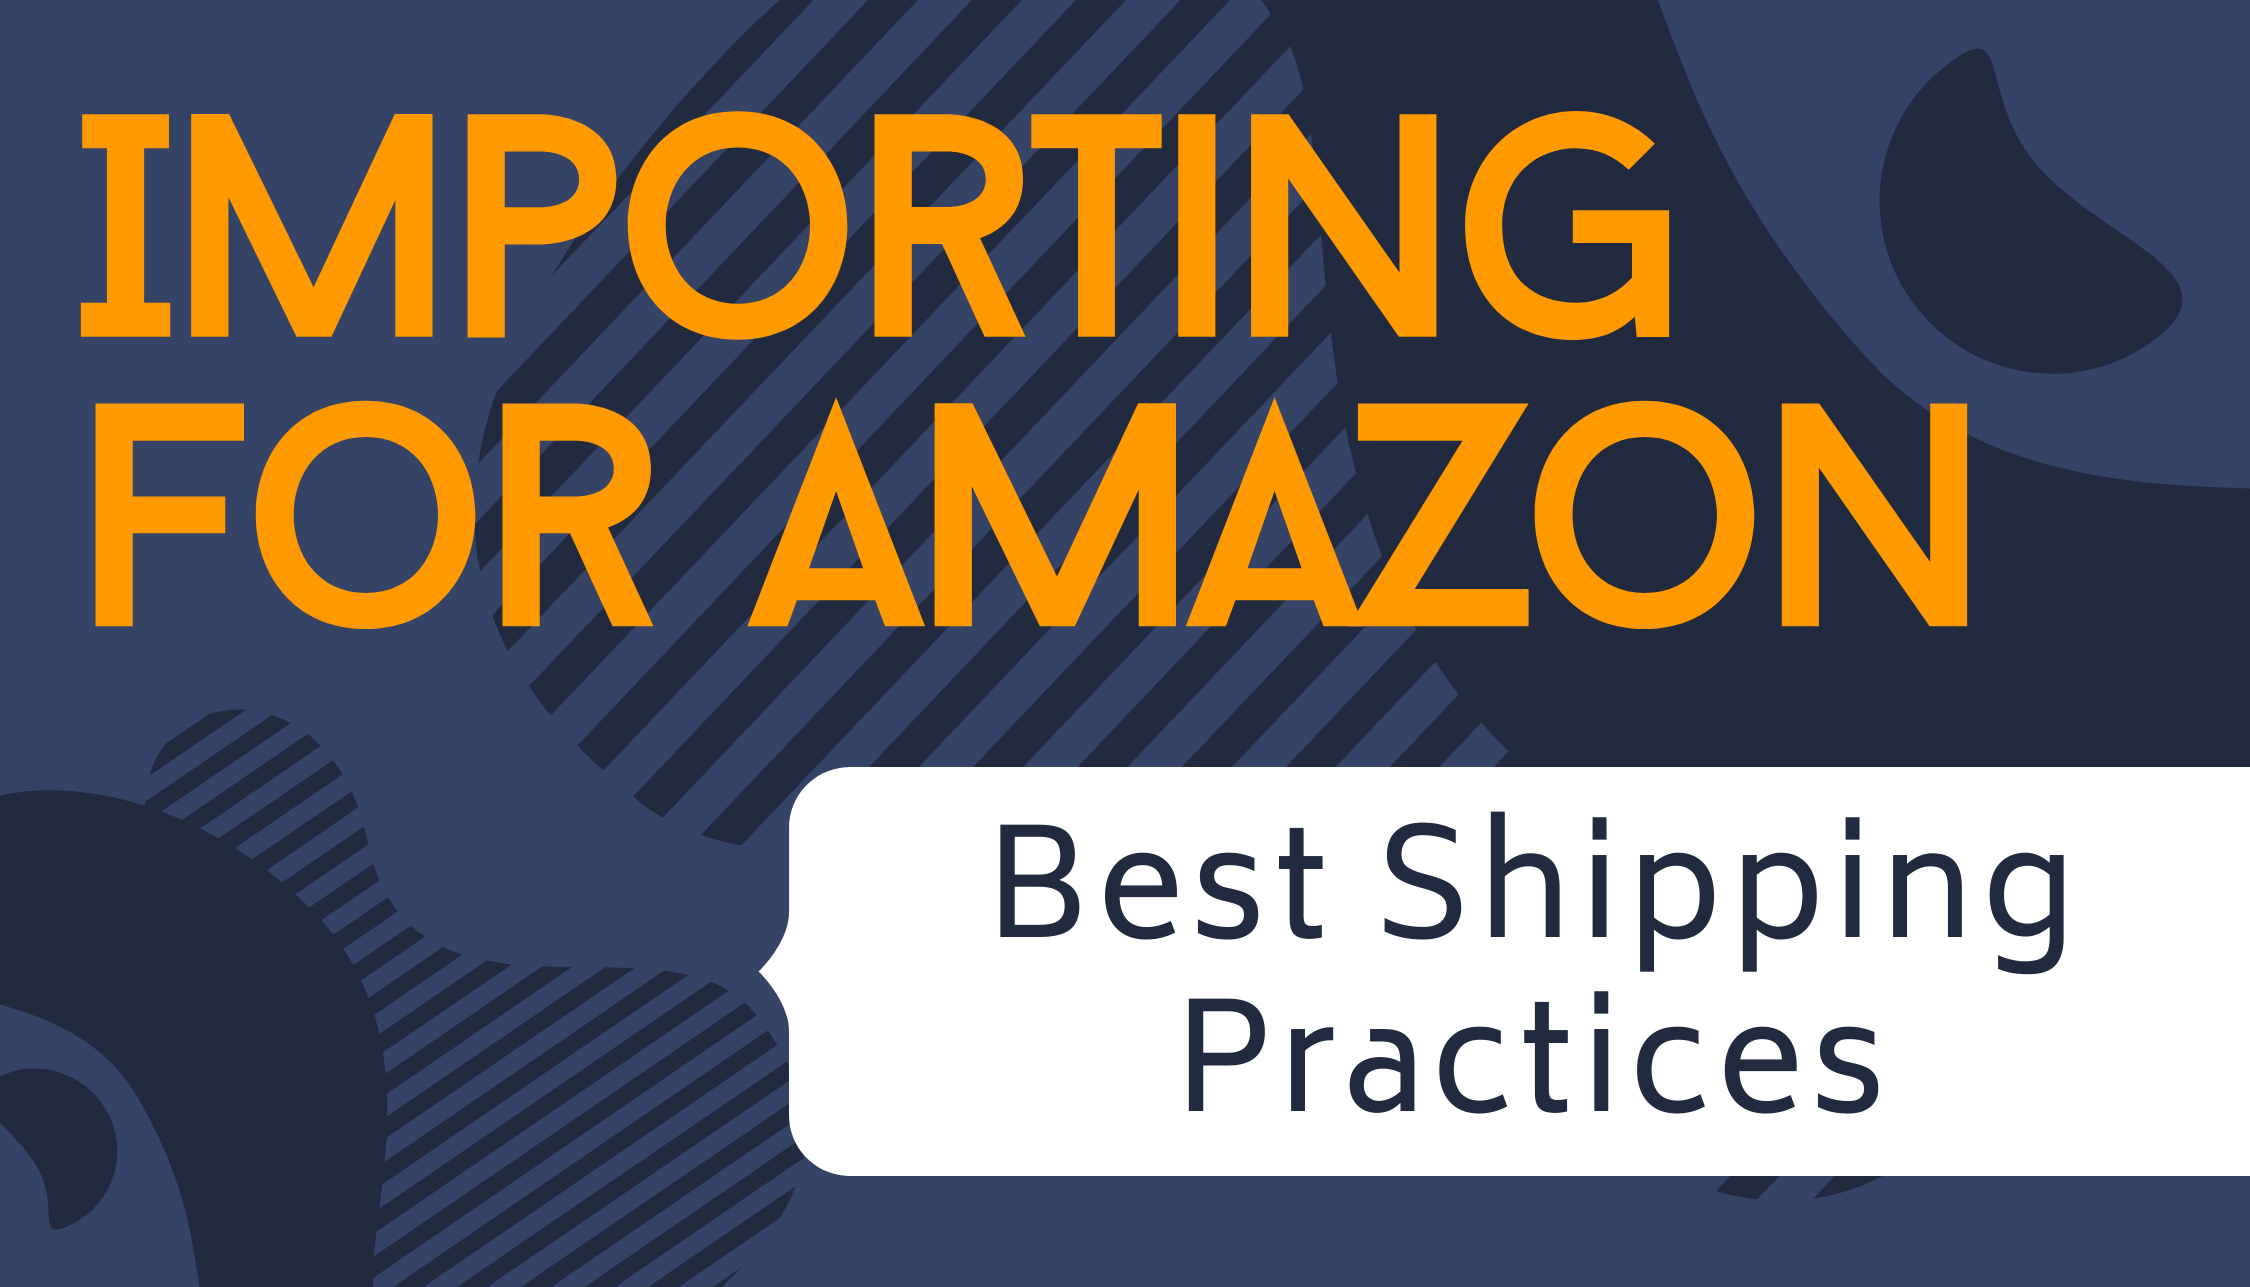 Importing for Amazon: Best Shipping Practices